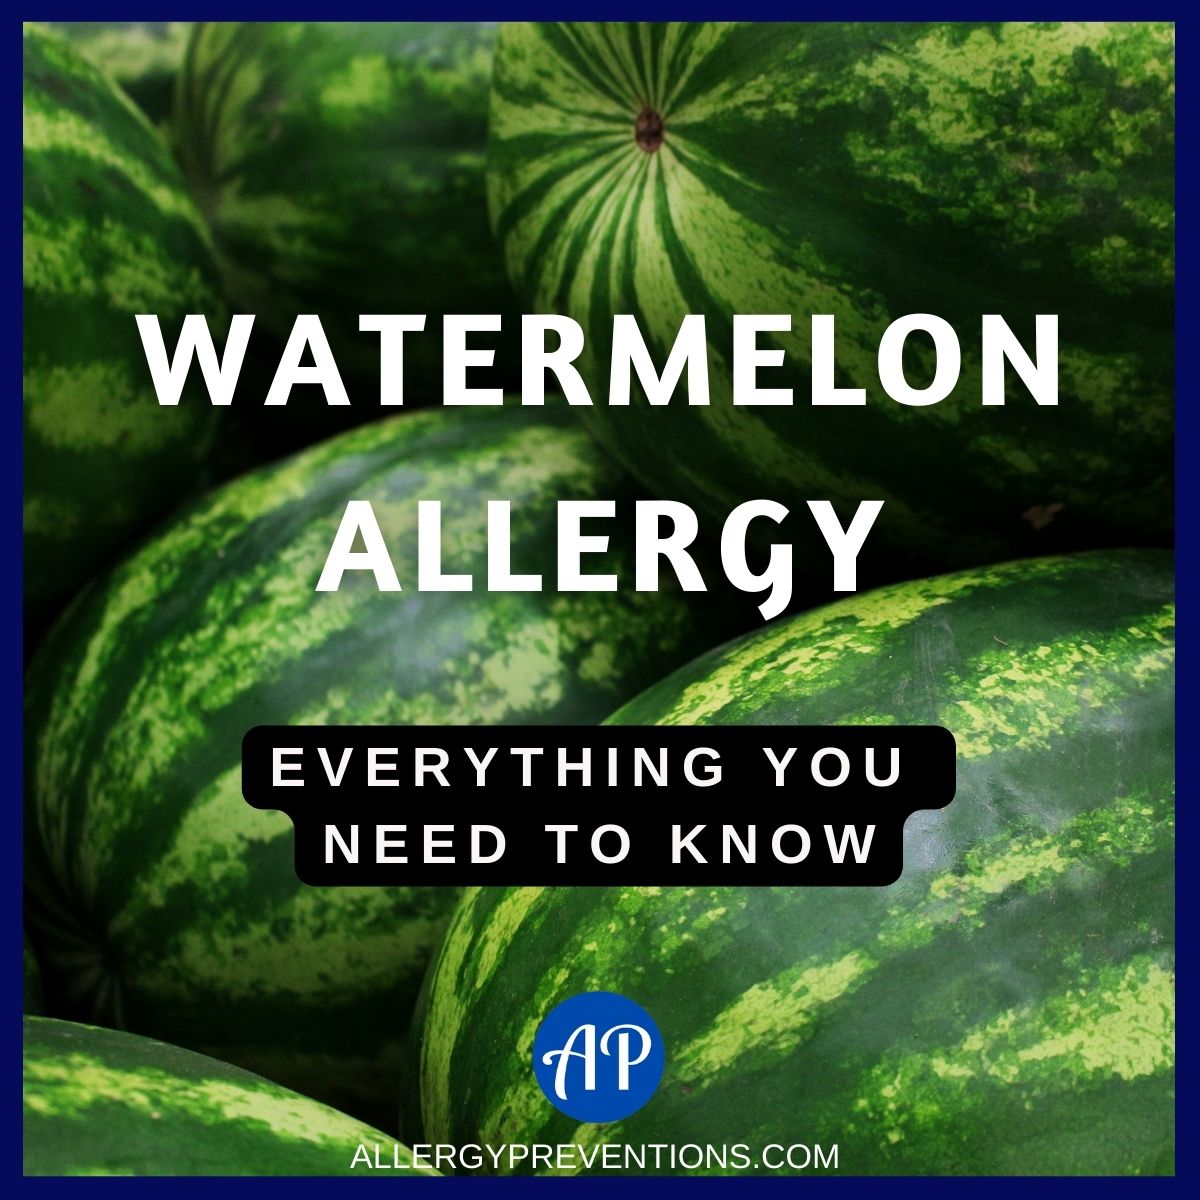 Watermelon Allergy: Everything You Need To Know